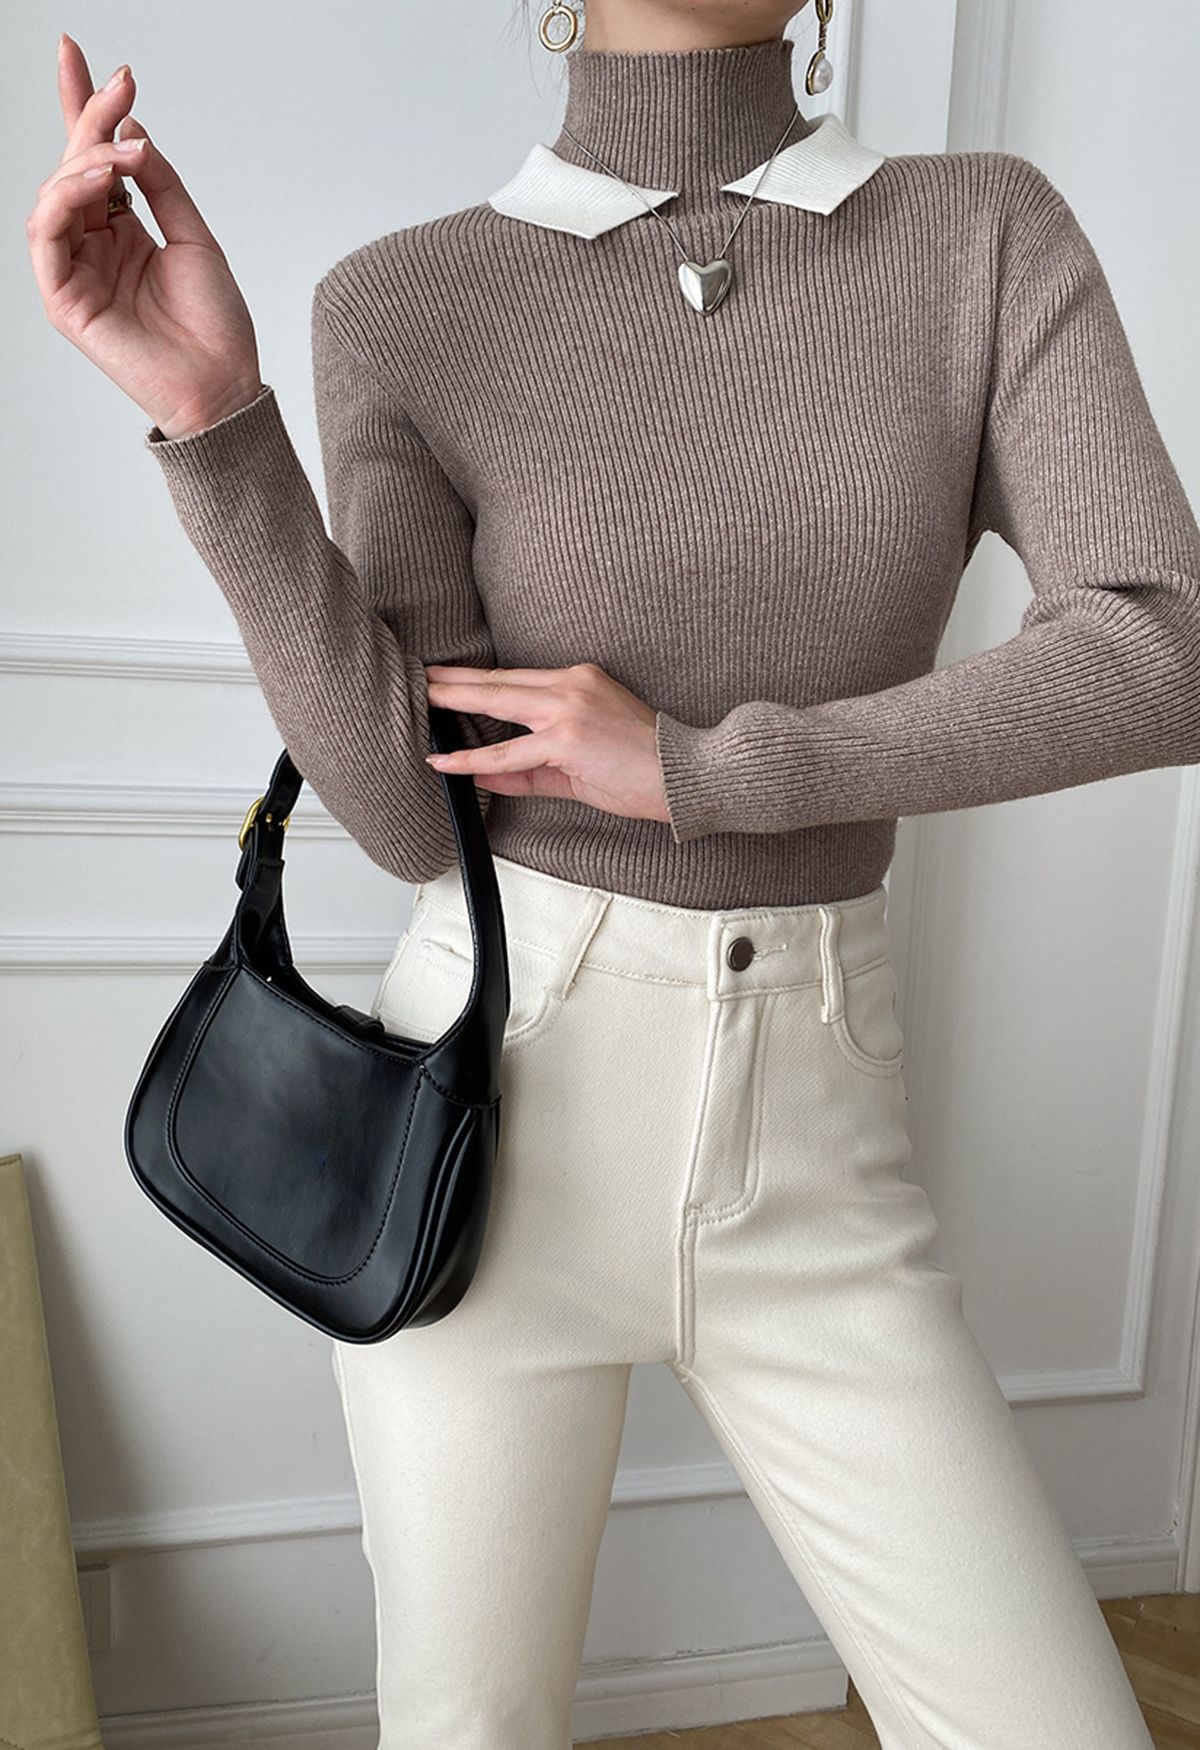 Contrast Doll Collar Mock Neck Knit Top in Taupe